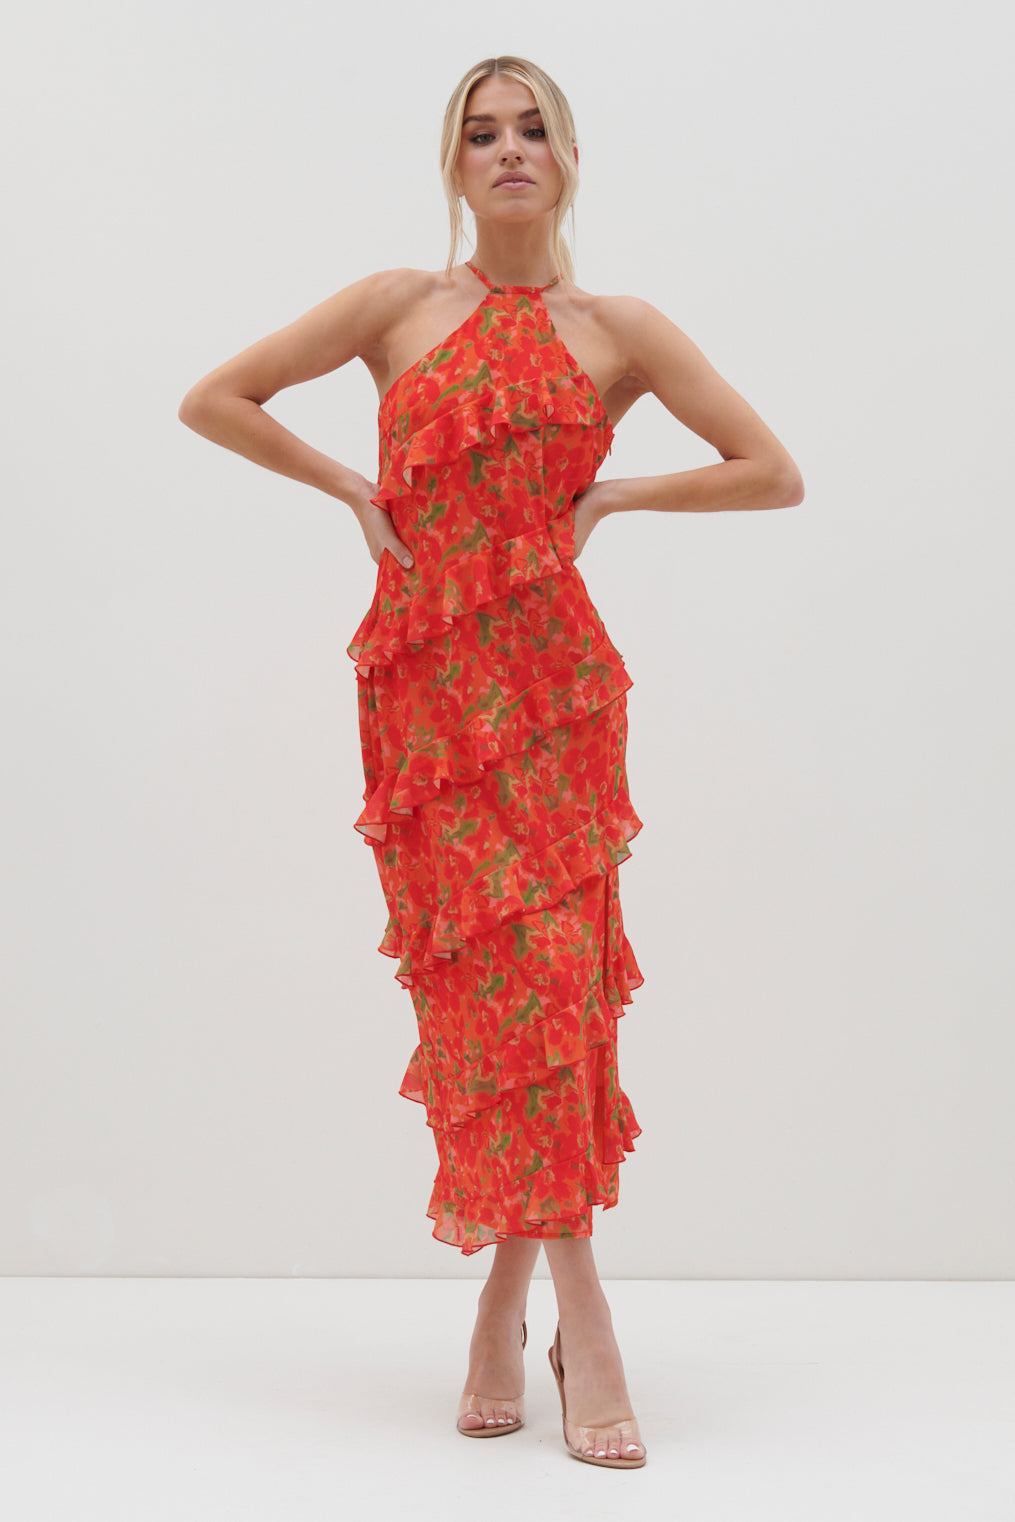 Katy Ruffle Midaxi Dress - Red and Orange Floral, 16